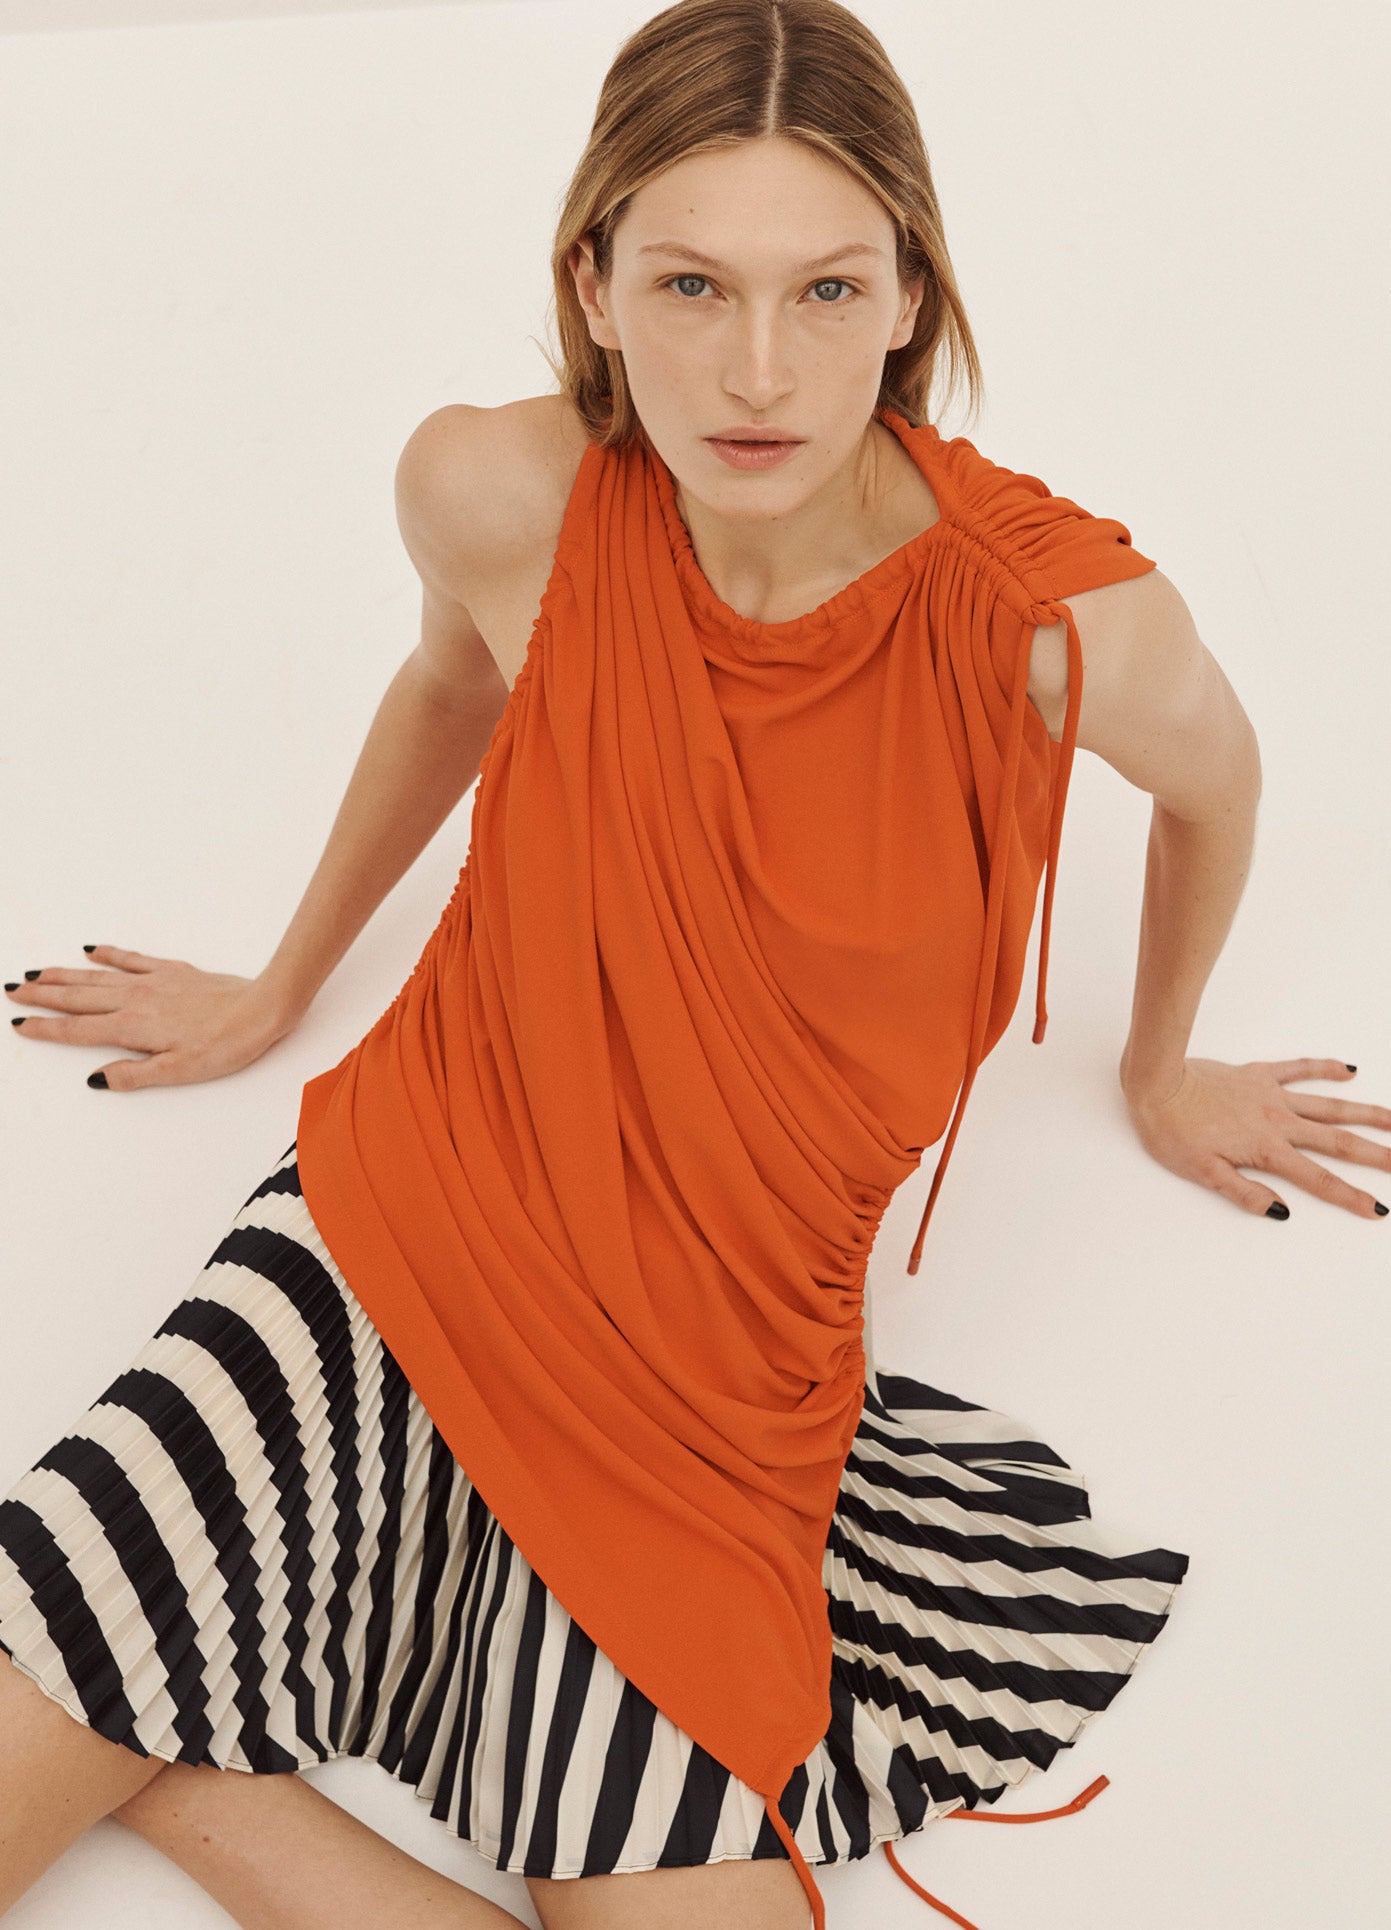 MONSE Drawstring Blouse in Orange on Model Sitting on the Ground Aerial View